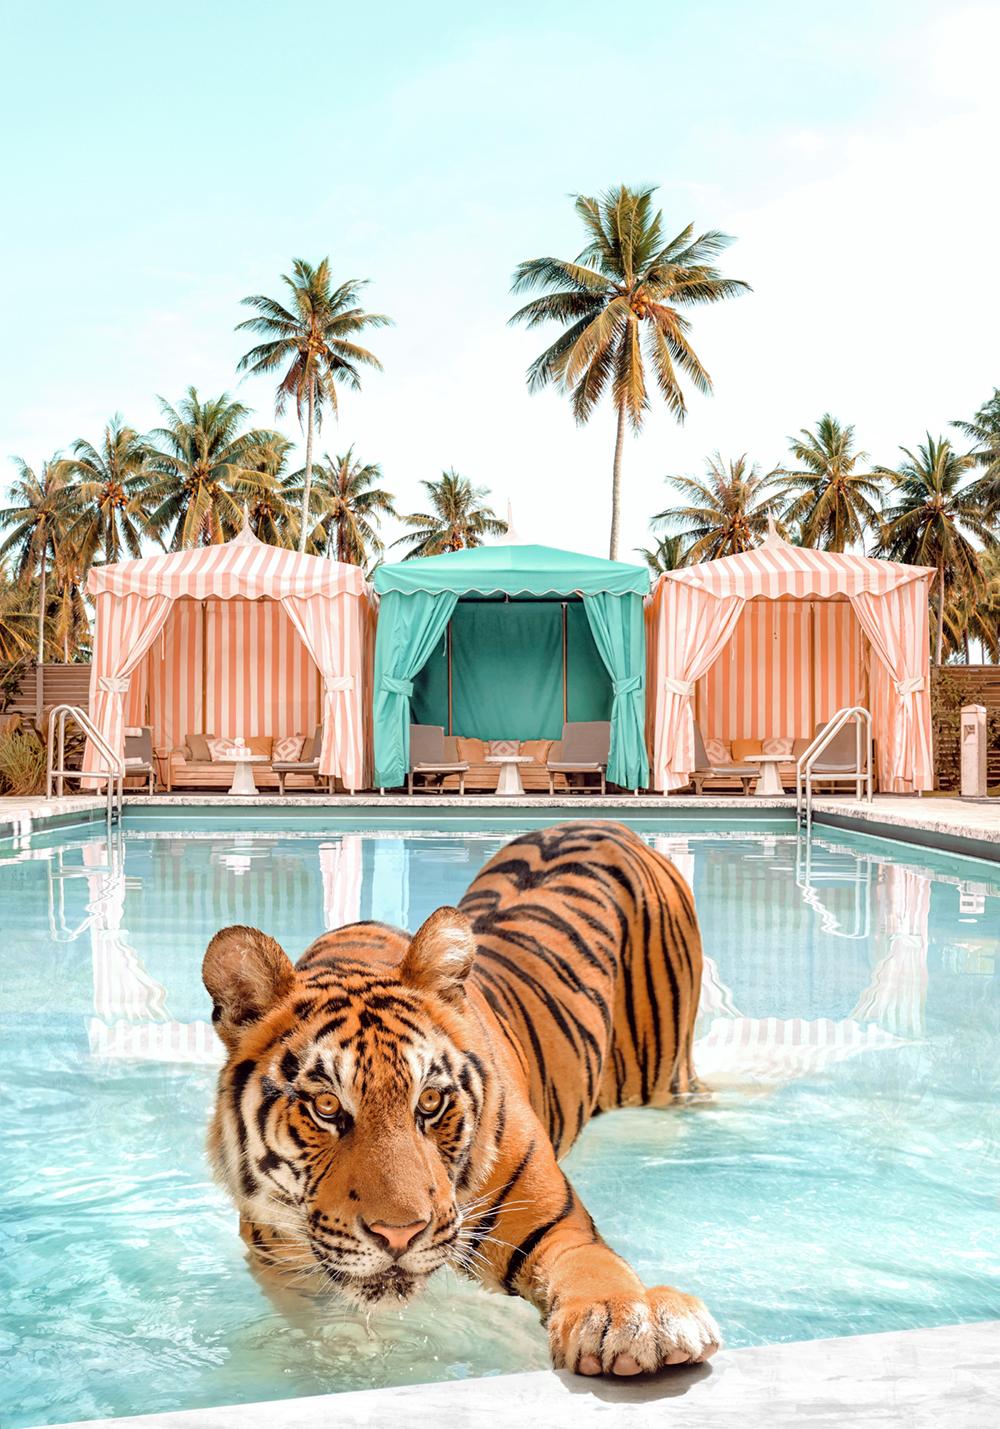 Paul Fuentes Landscape Photograph - Palm Springs Tiger - signed limited edition print